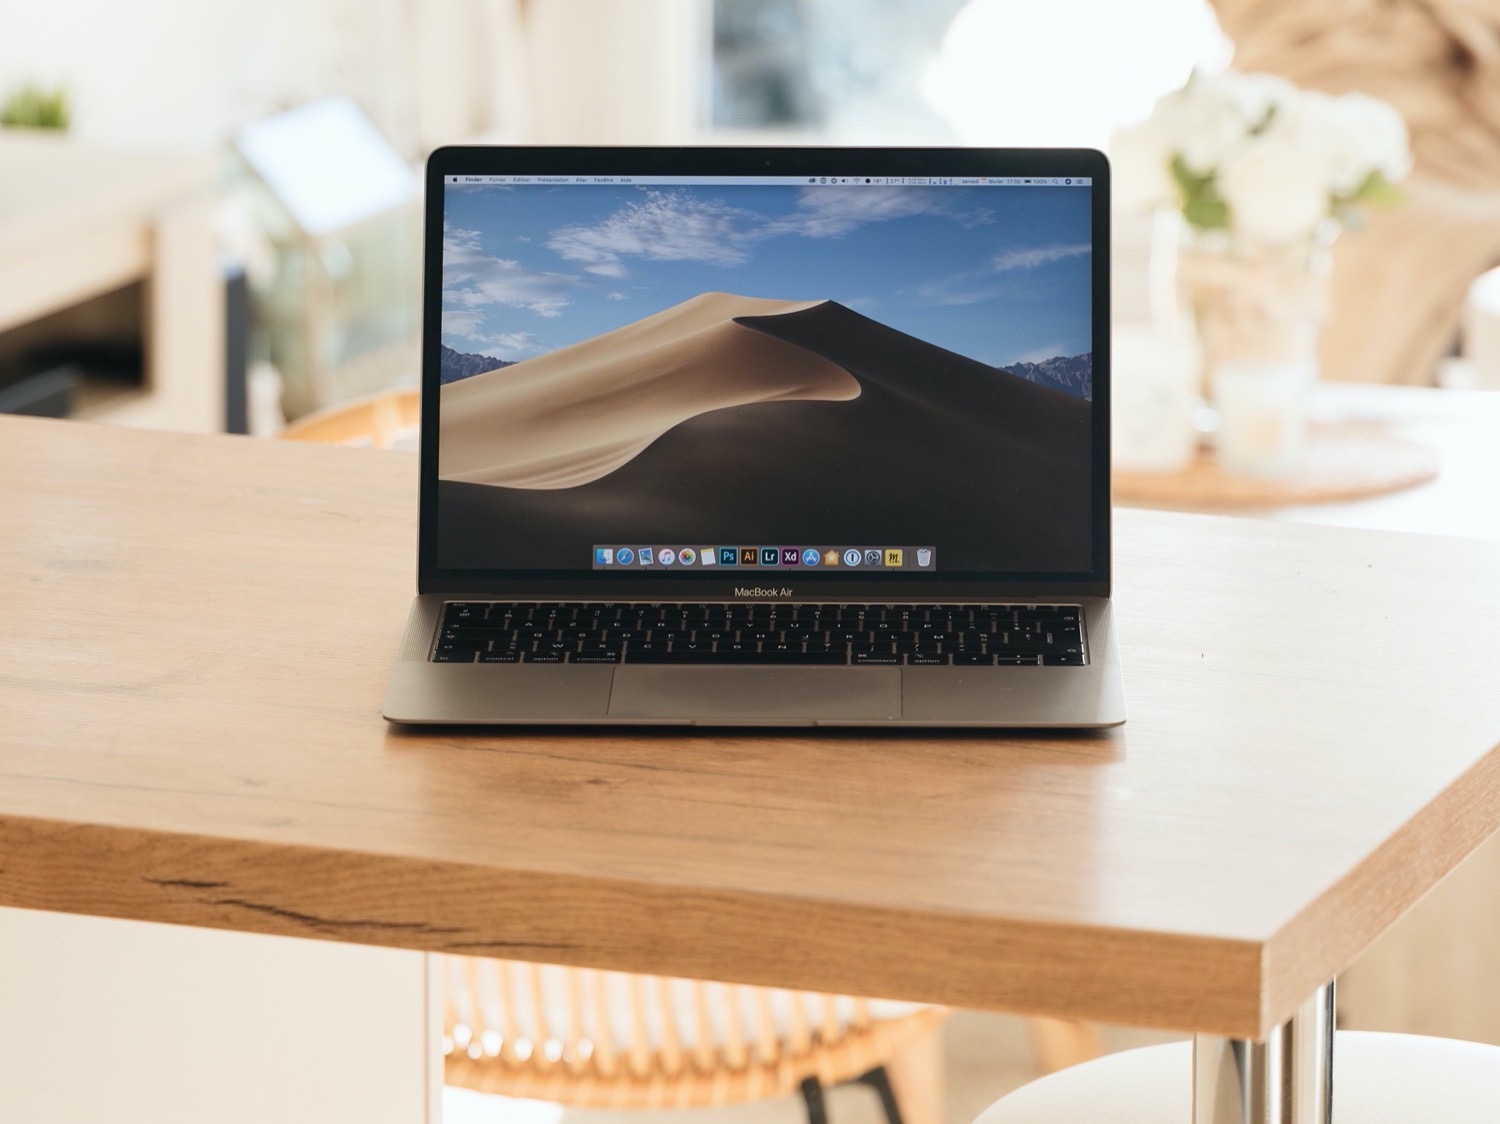 A14 Bionic-based, 5 nm and 12-core MacBook arriving in 2021 as 